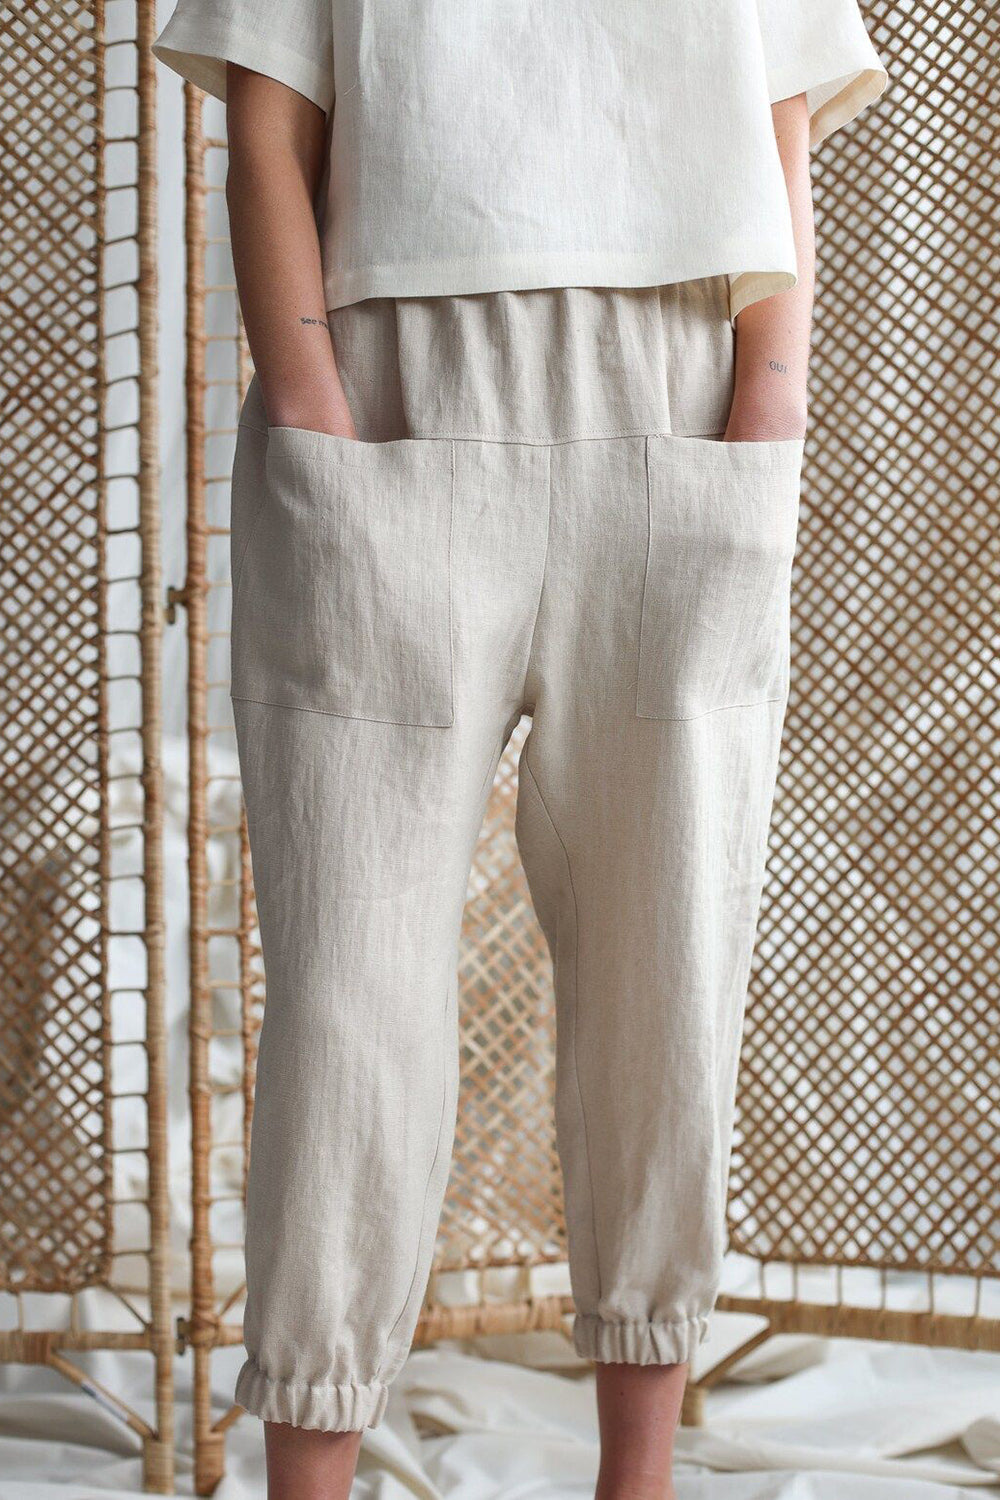 Mid-Rise Waist Pants with Pockets - 3 Colors